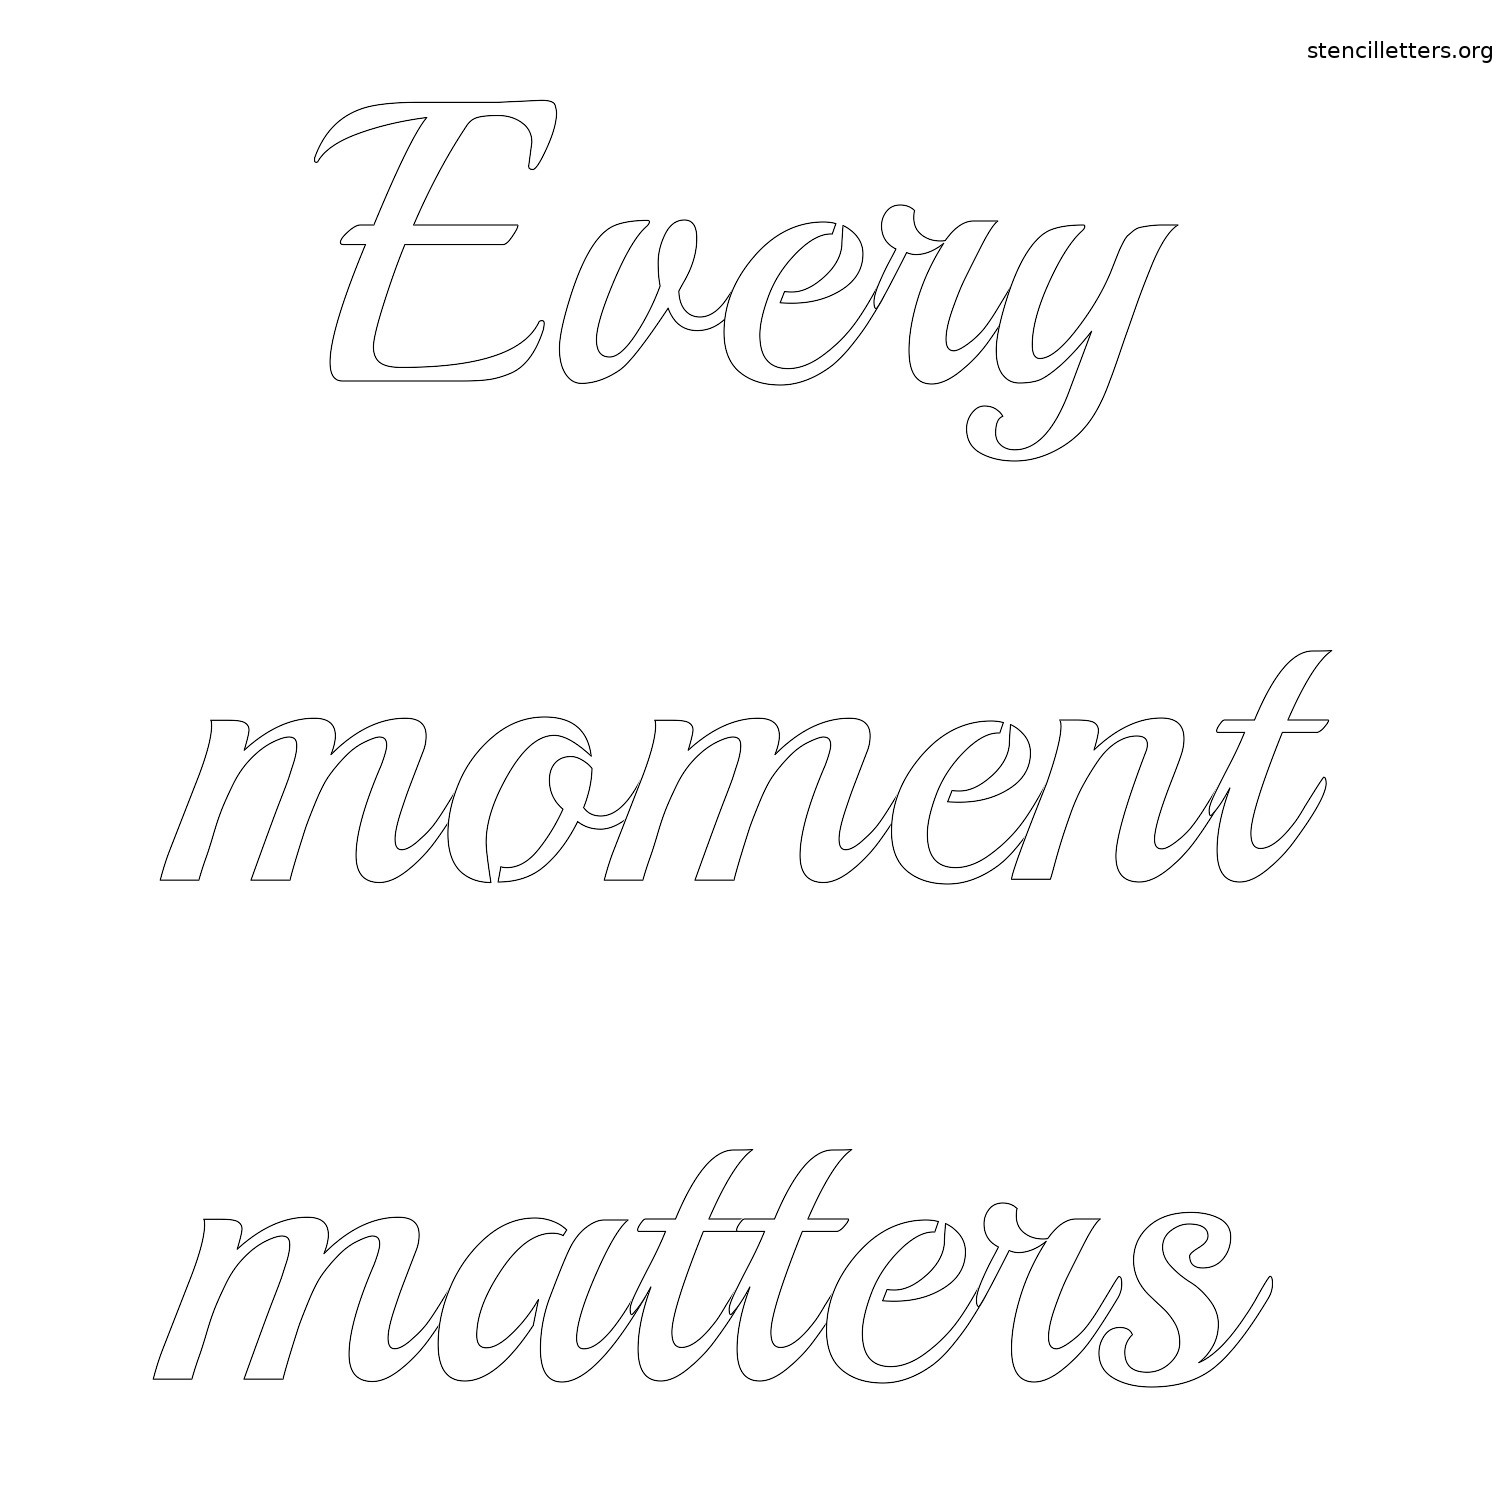 every-moment-matters-quote-stencil-outline.jpg